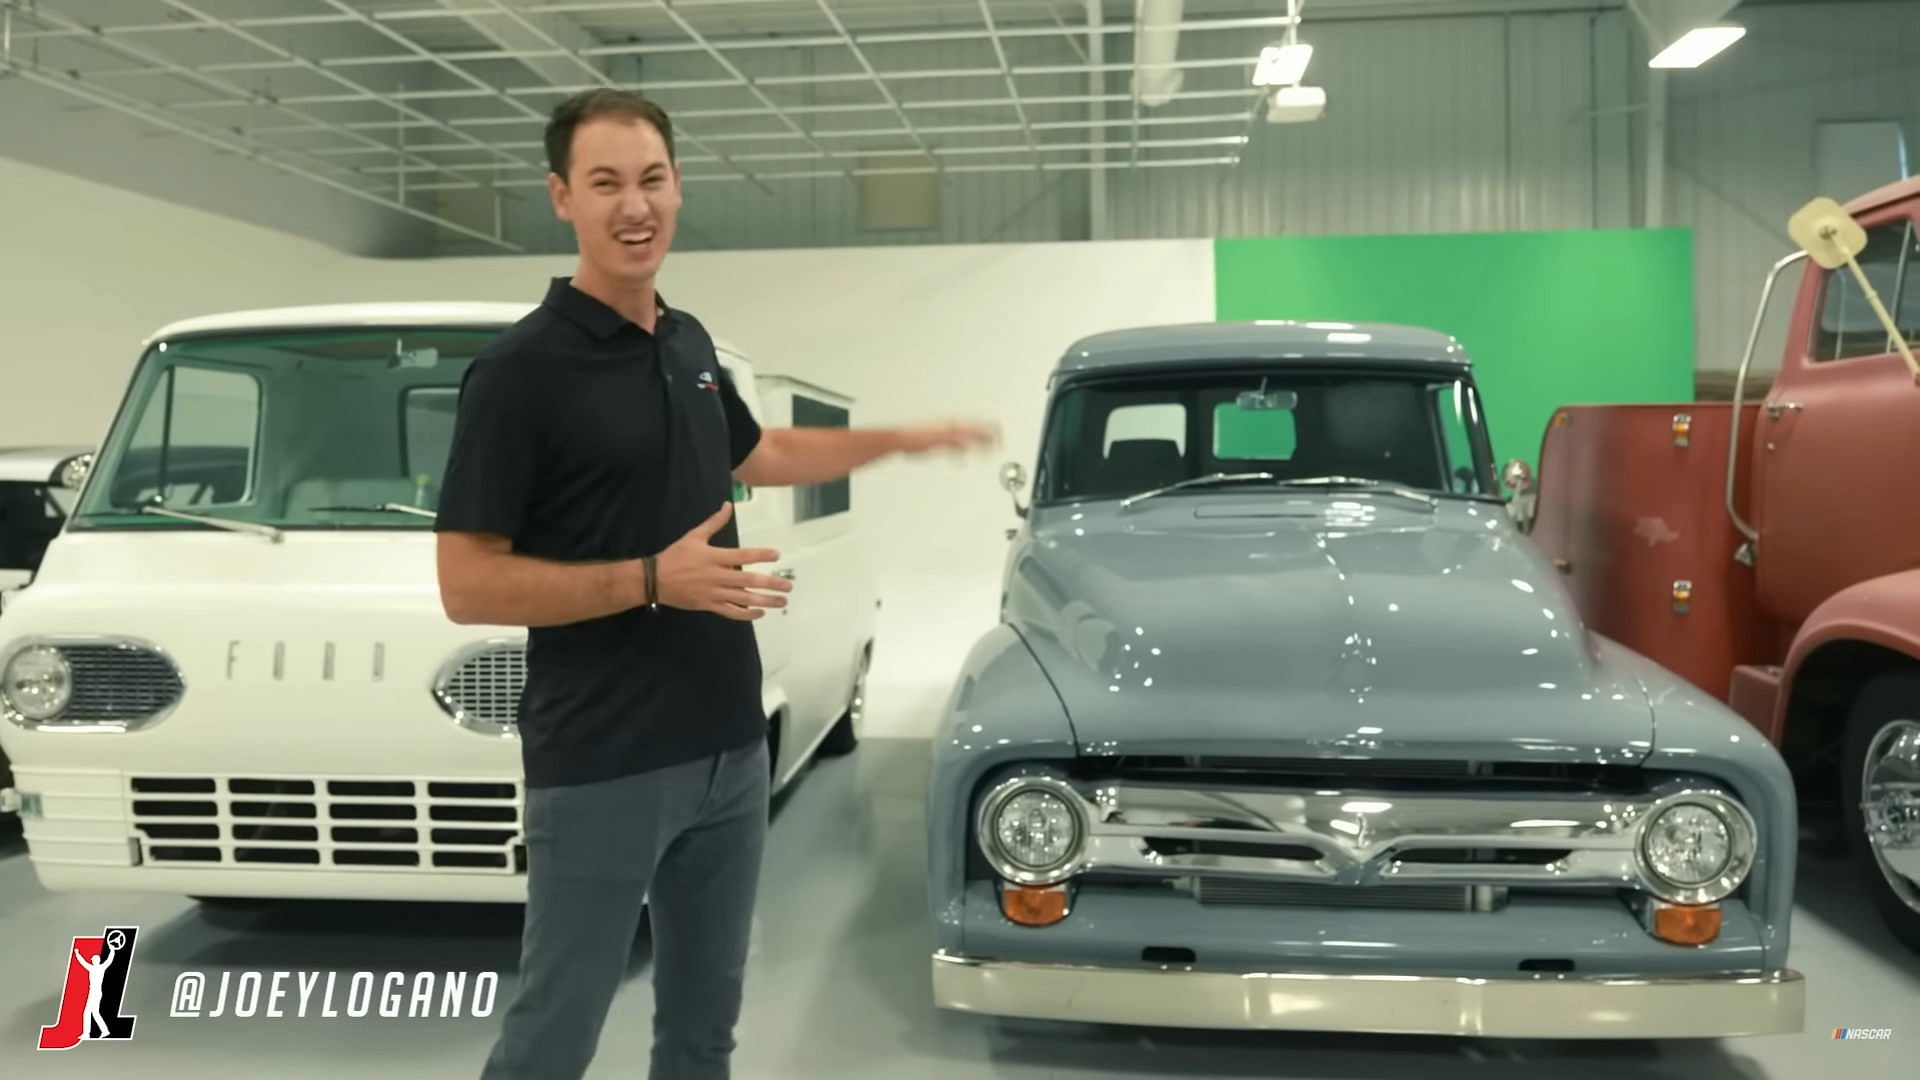 Joey Logano and his 1956 Ford Panel Van